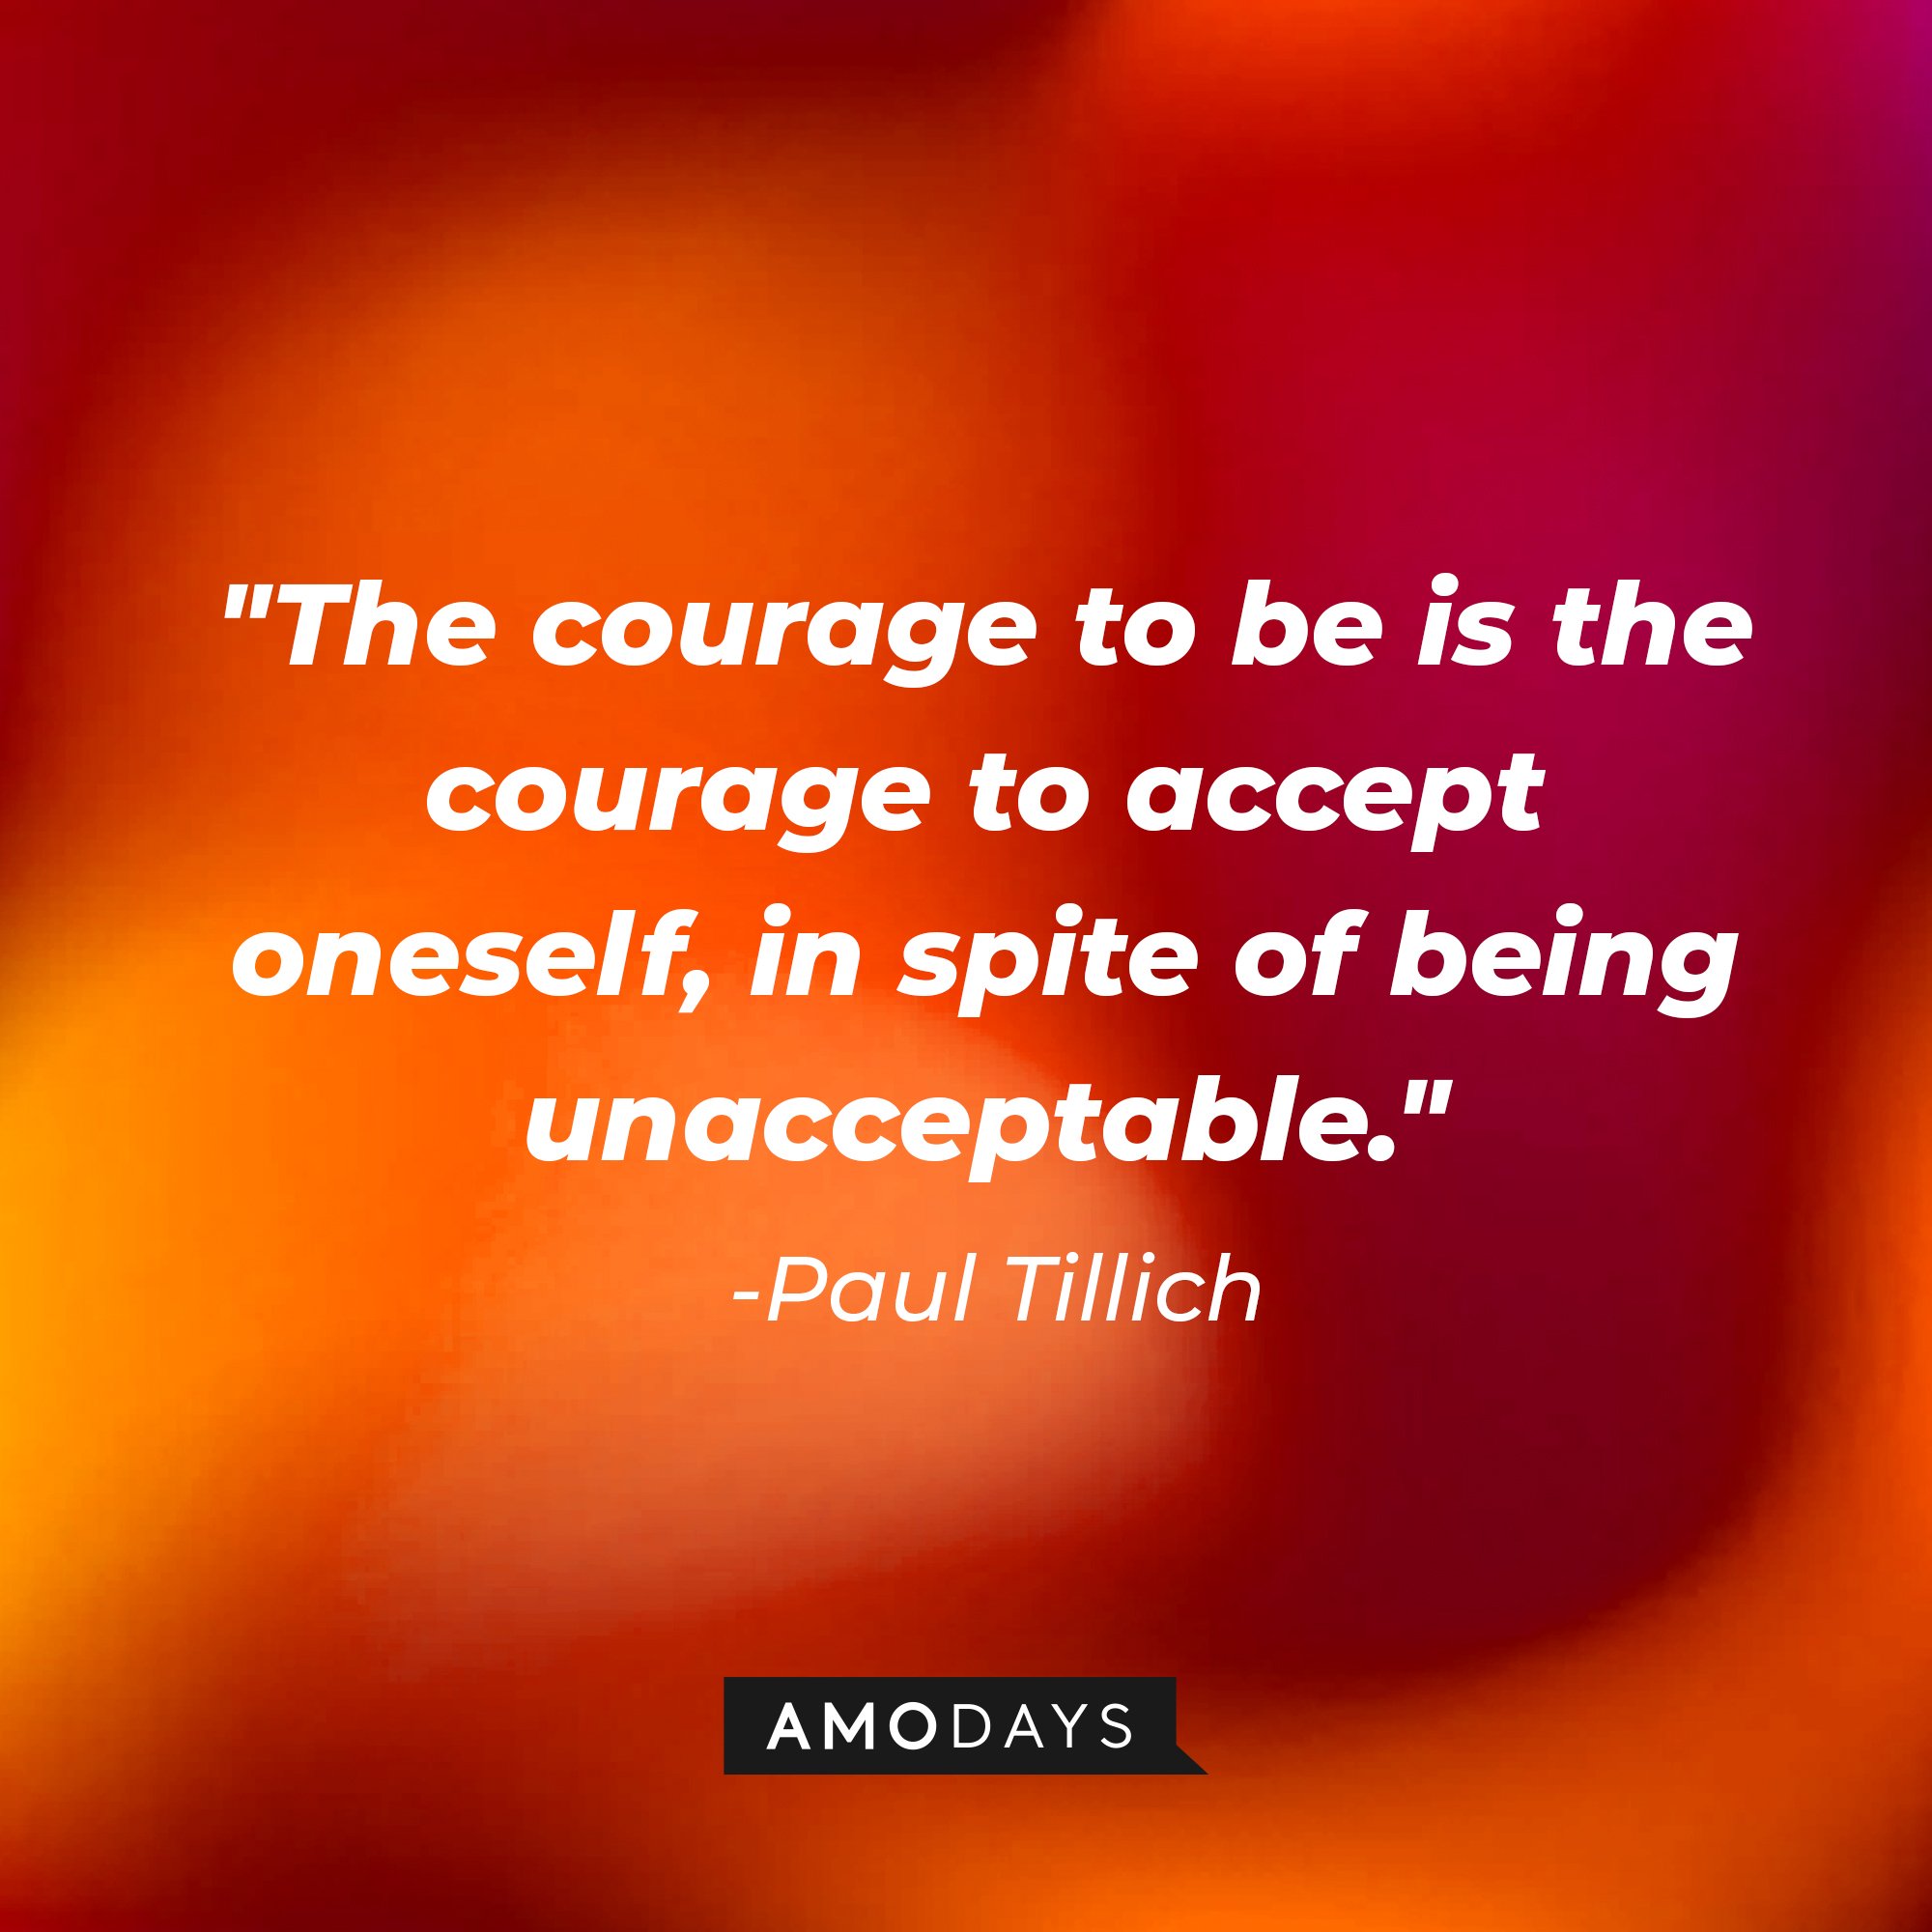 Paul Tillich's quote: "The courage to be is the courage to accept oneself, in spite of being unacceptable." | Image: AmoDays 